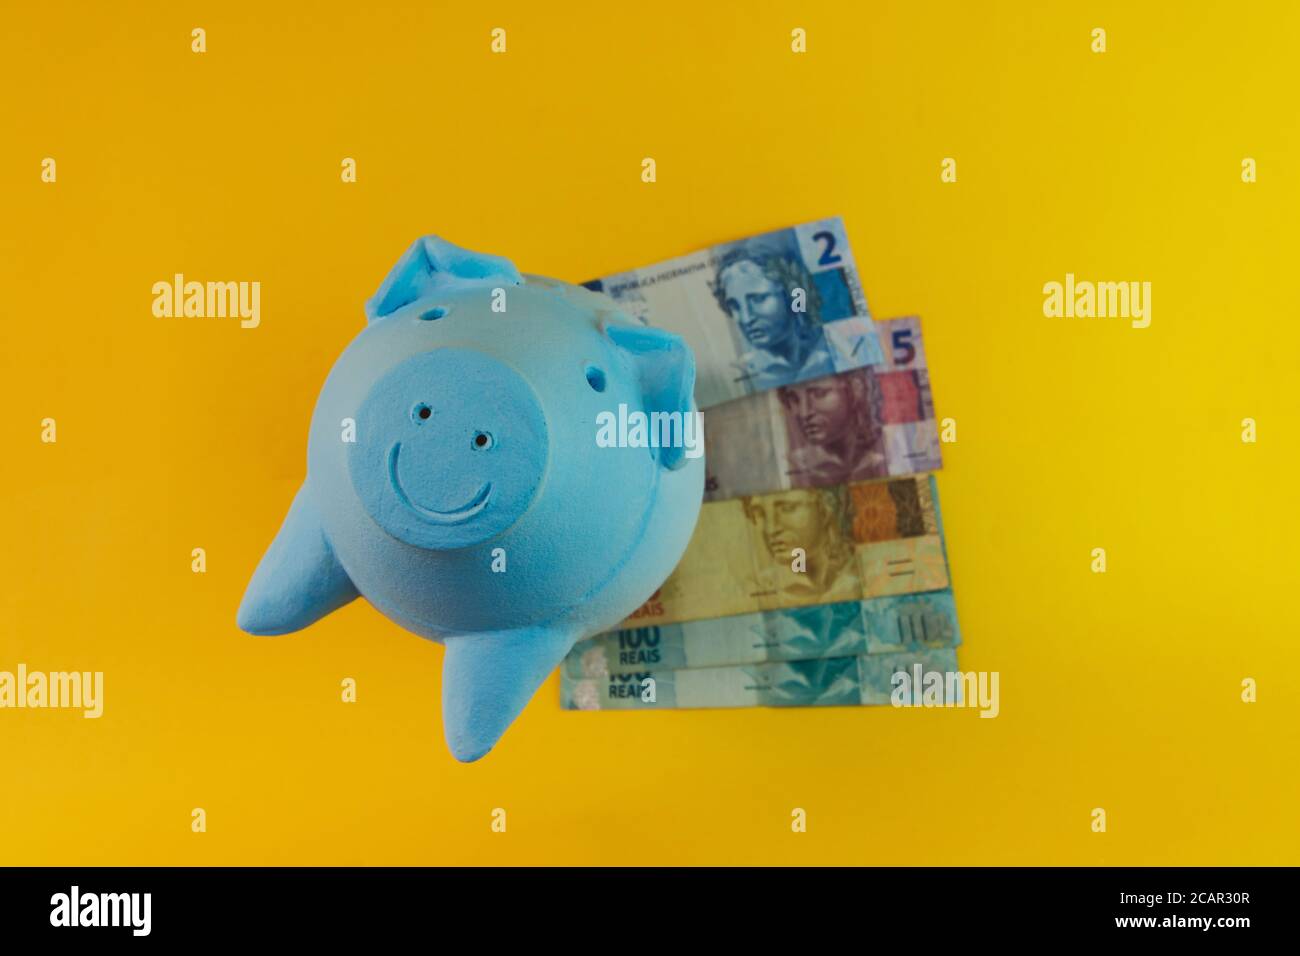 Piggy coins with calculator and brazilian money isolated. Stock Photo